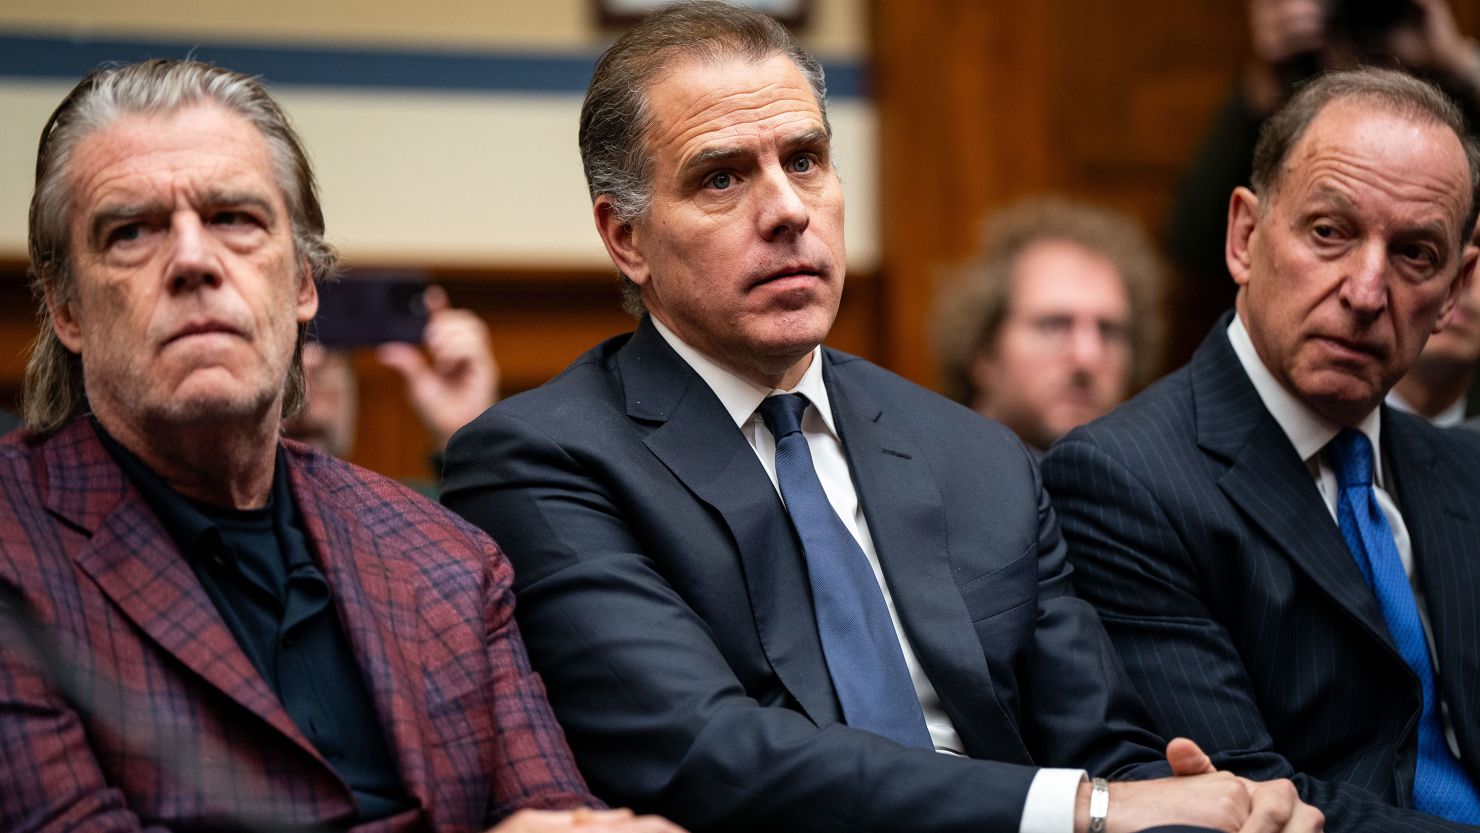 WASHINGTON, DC - JANUARY 10:Hunter Biden, son of U.S. President Joe Biden, flanked by Kevin Morris, left, and Abbe Lowell, right, attend a House Oversight Committee meeting on January 10, 2024 in Washington, DC. The committee is meeting today as it considers citing him for Contempt of Congress. (Photo by Kent Nishimura/Getty Images)